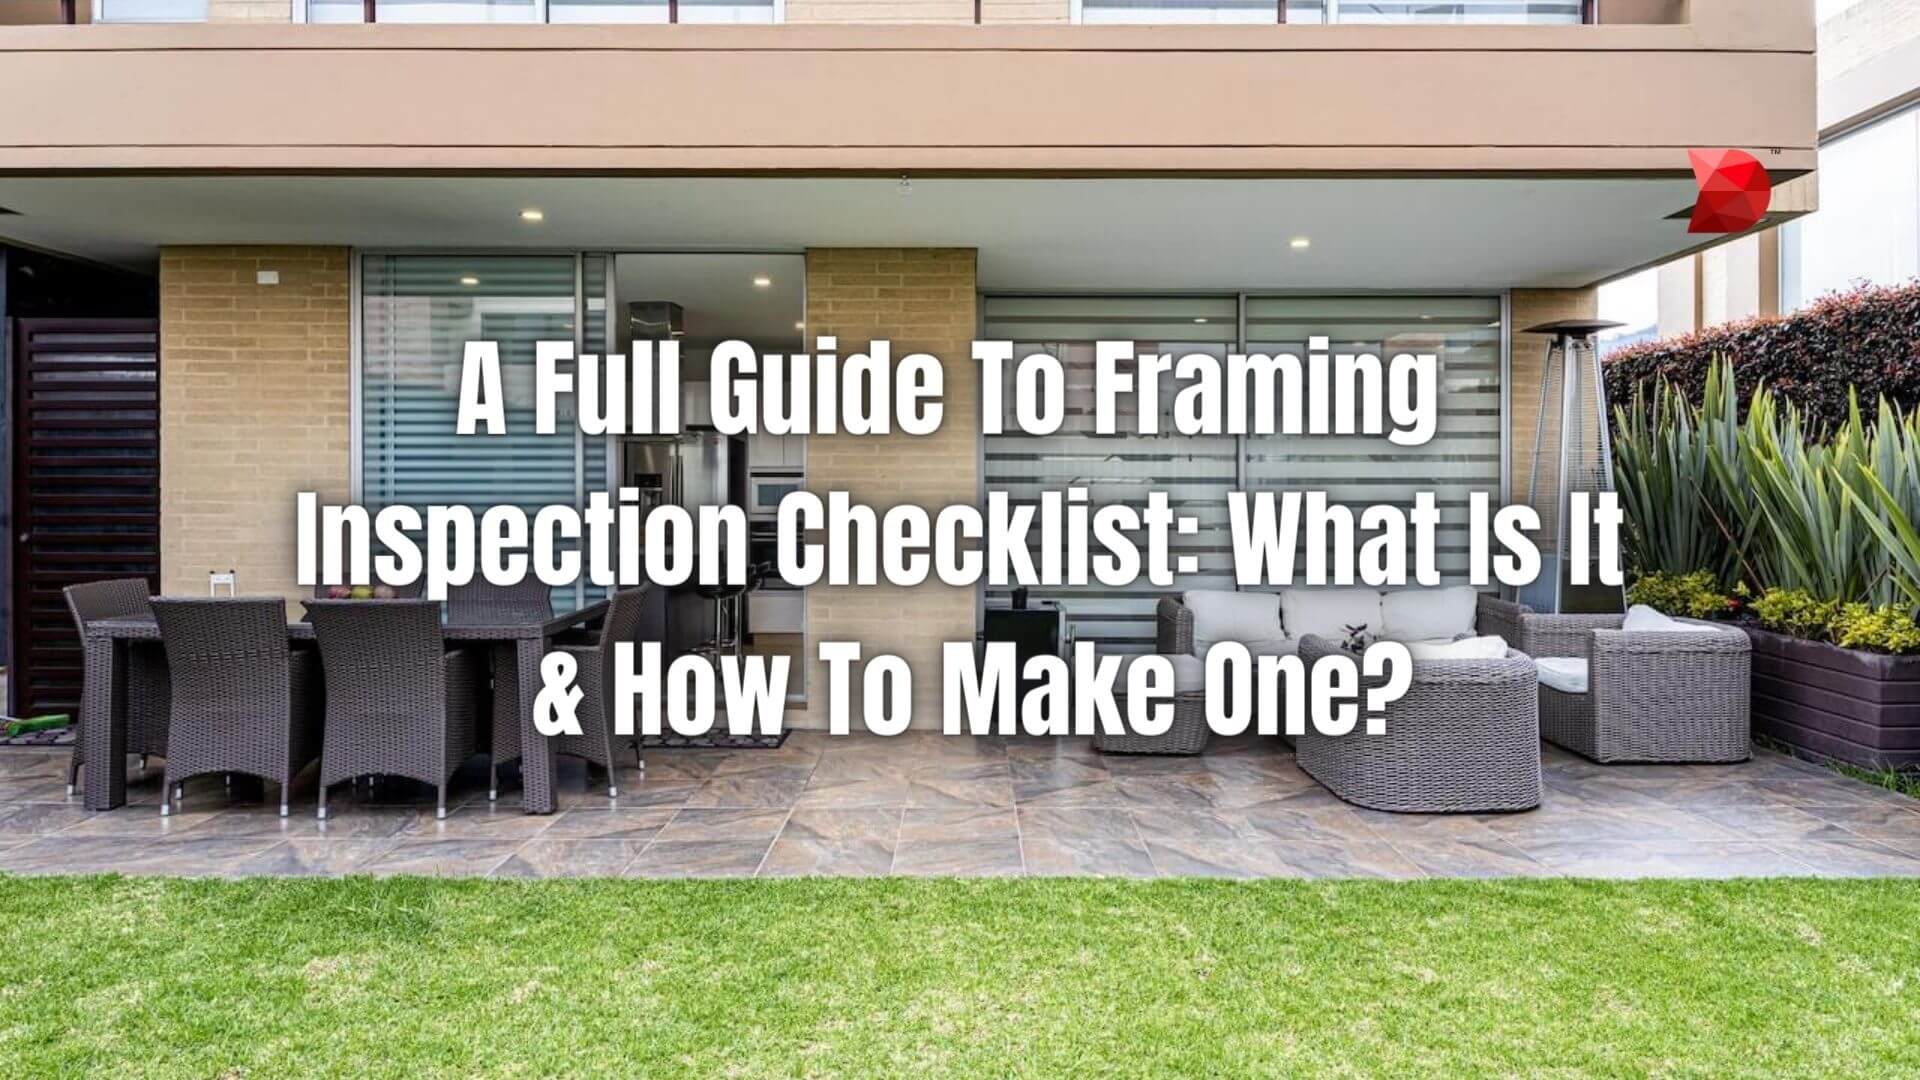 A Full Guide To Framing Inspection Checklist What Is It & How To Make One